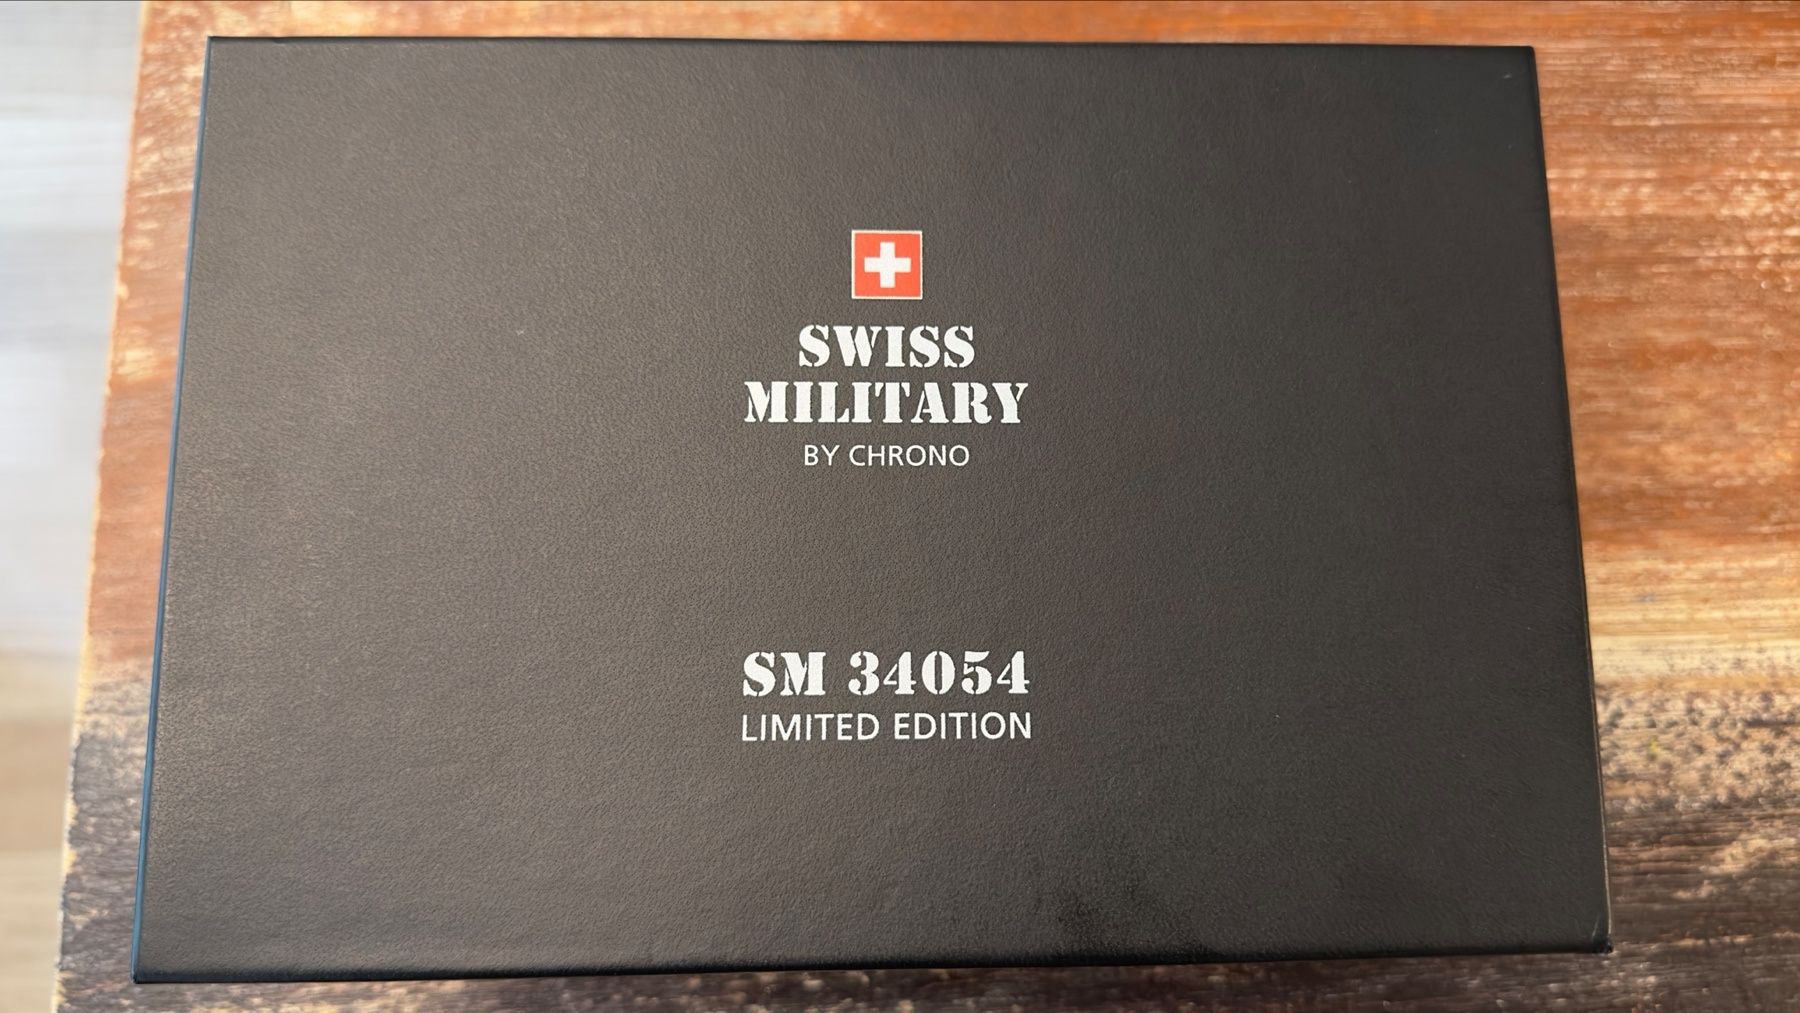 Swiss military by chrono SM34054 LIMITED EDITION